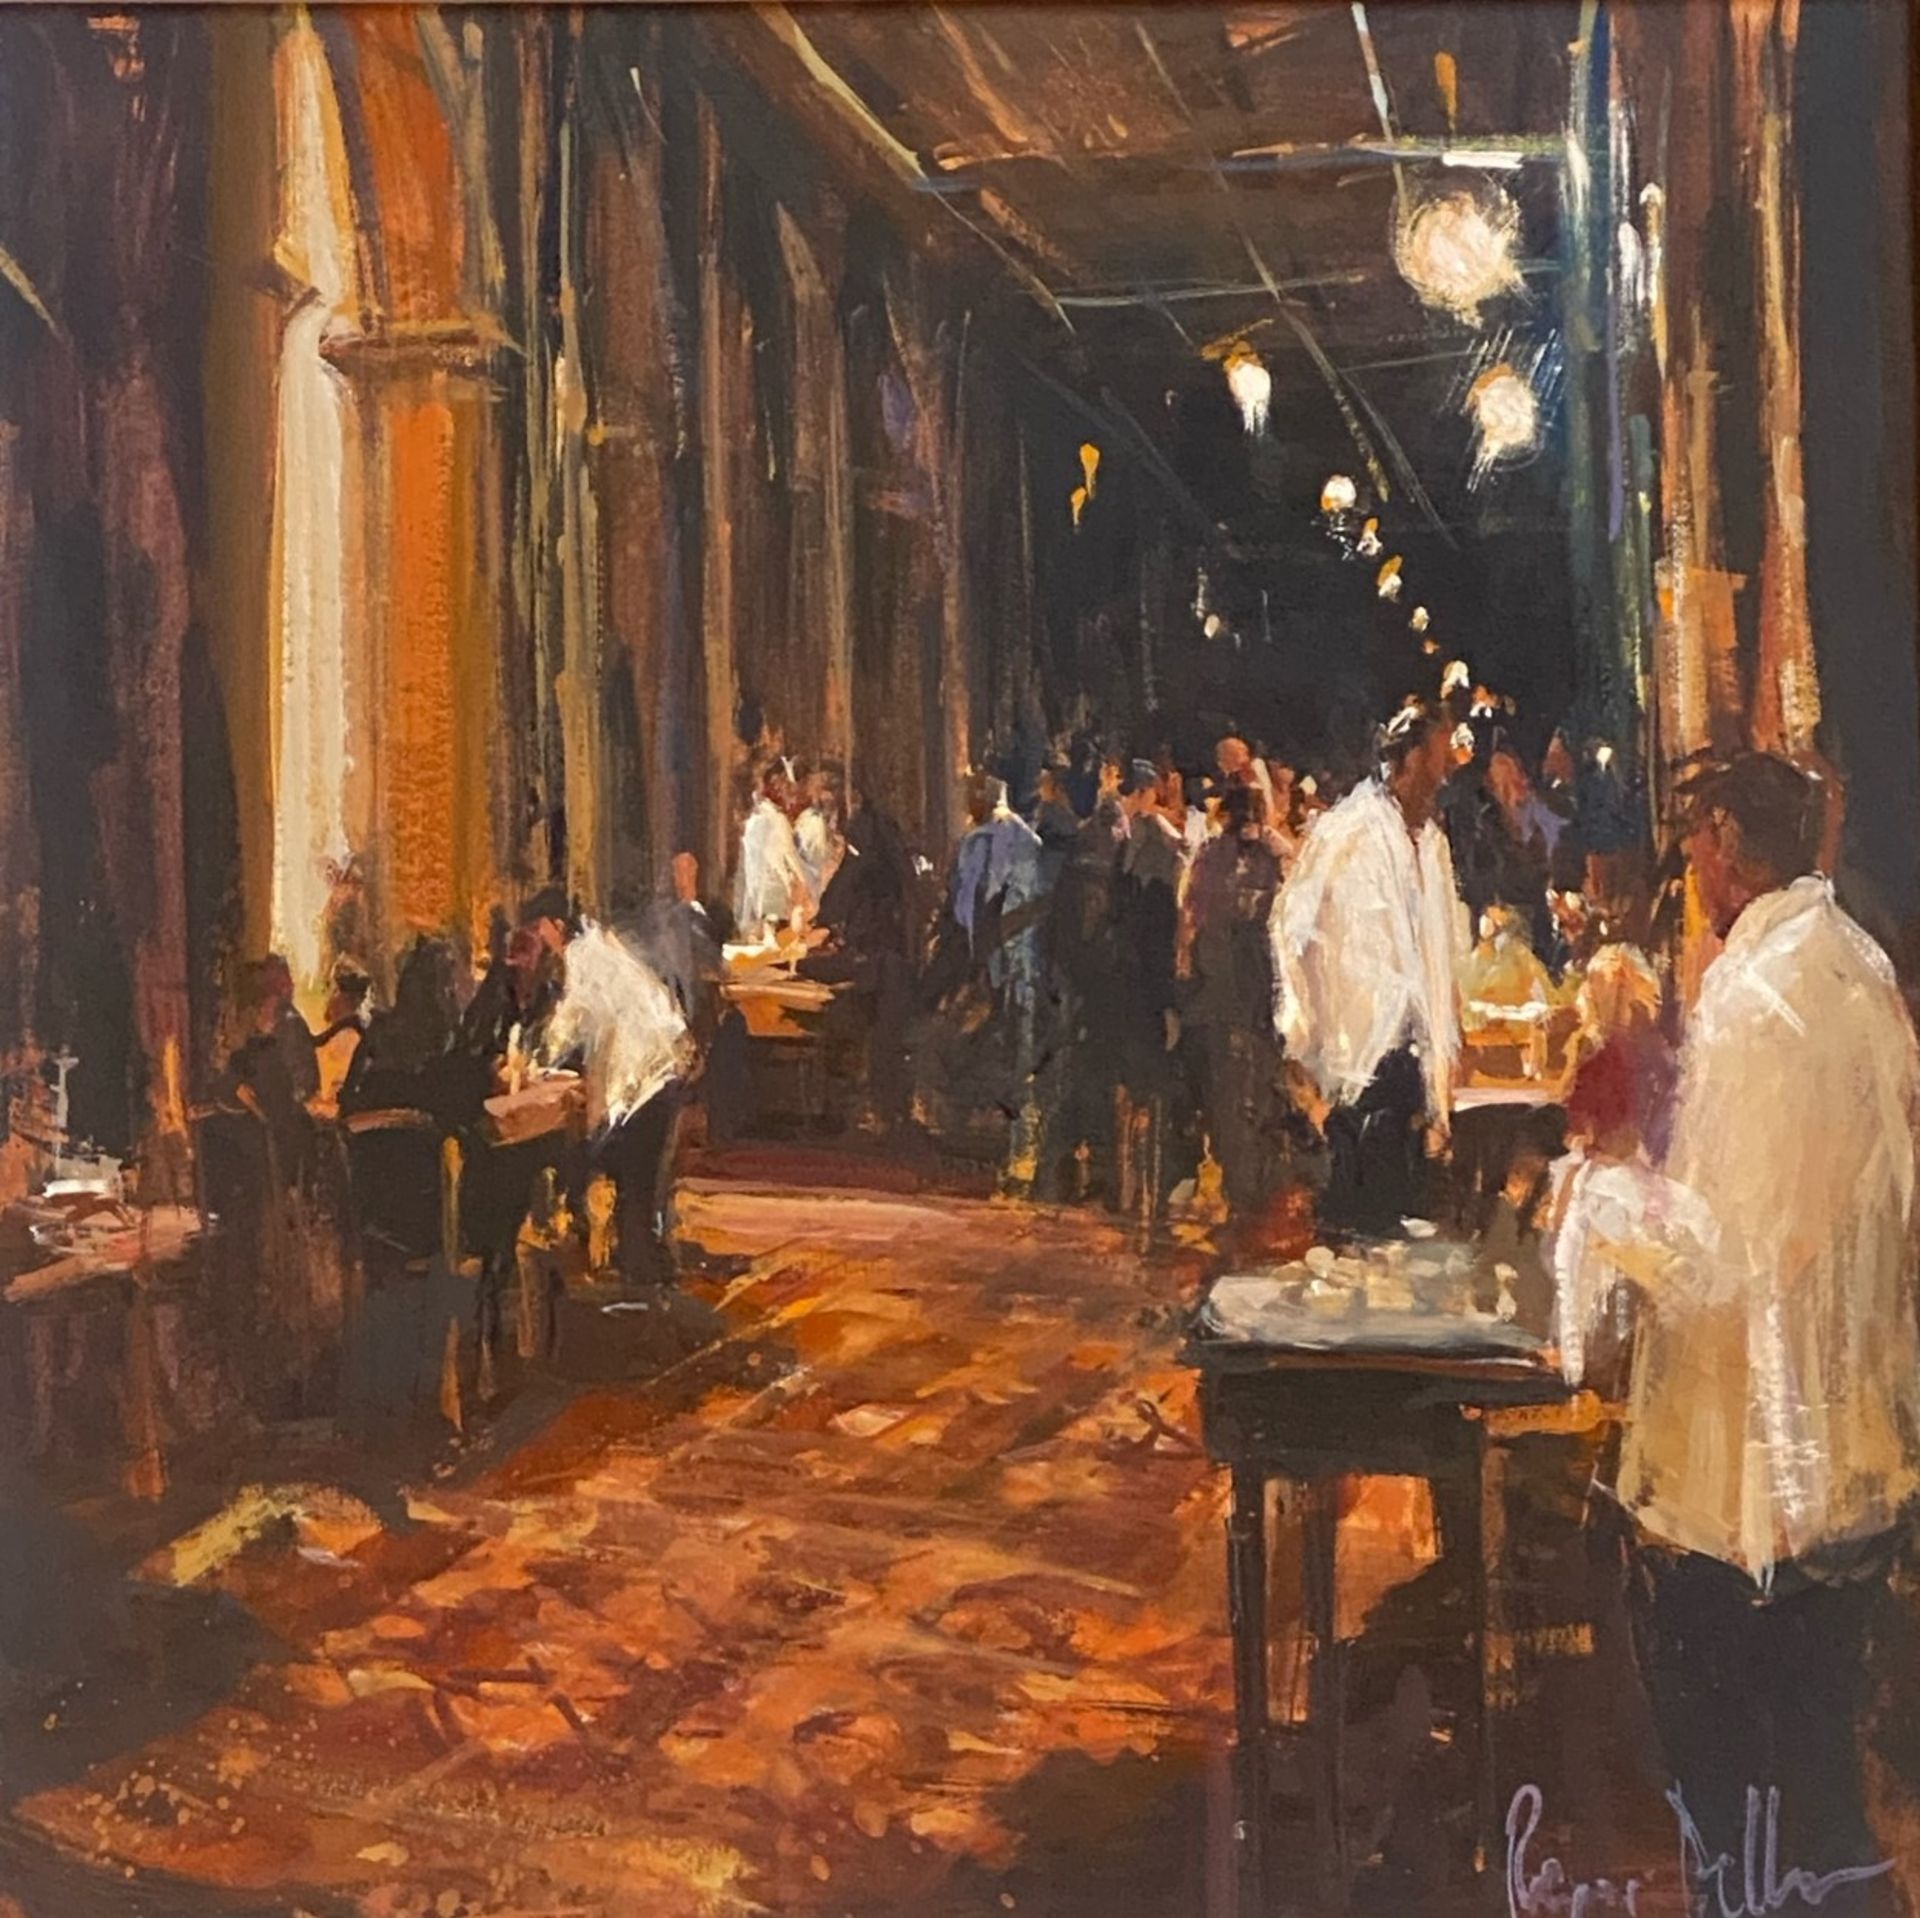 Rodger Dellar PS RI ROI signed oil painting “The Florian Café”